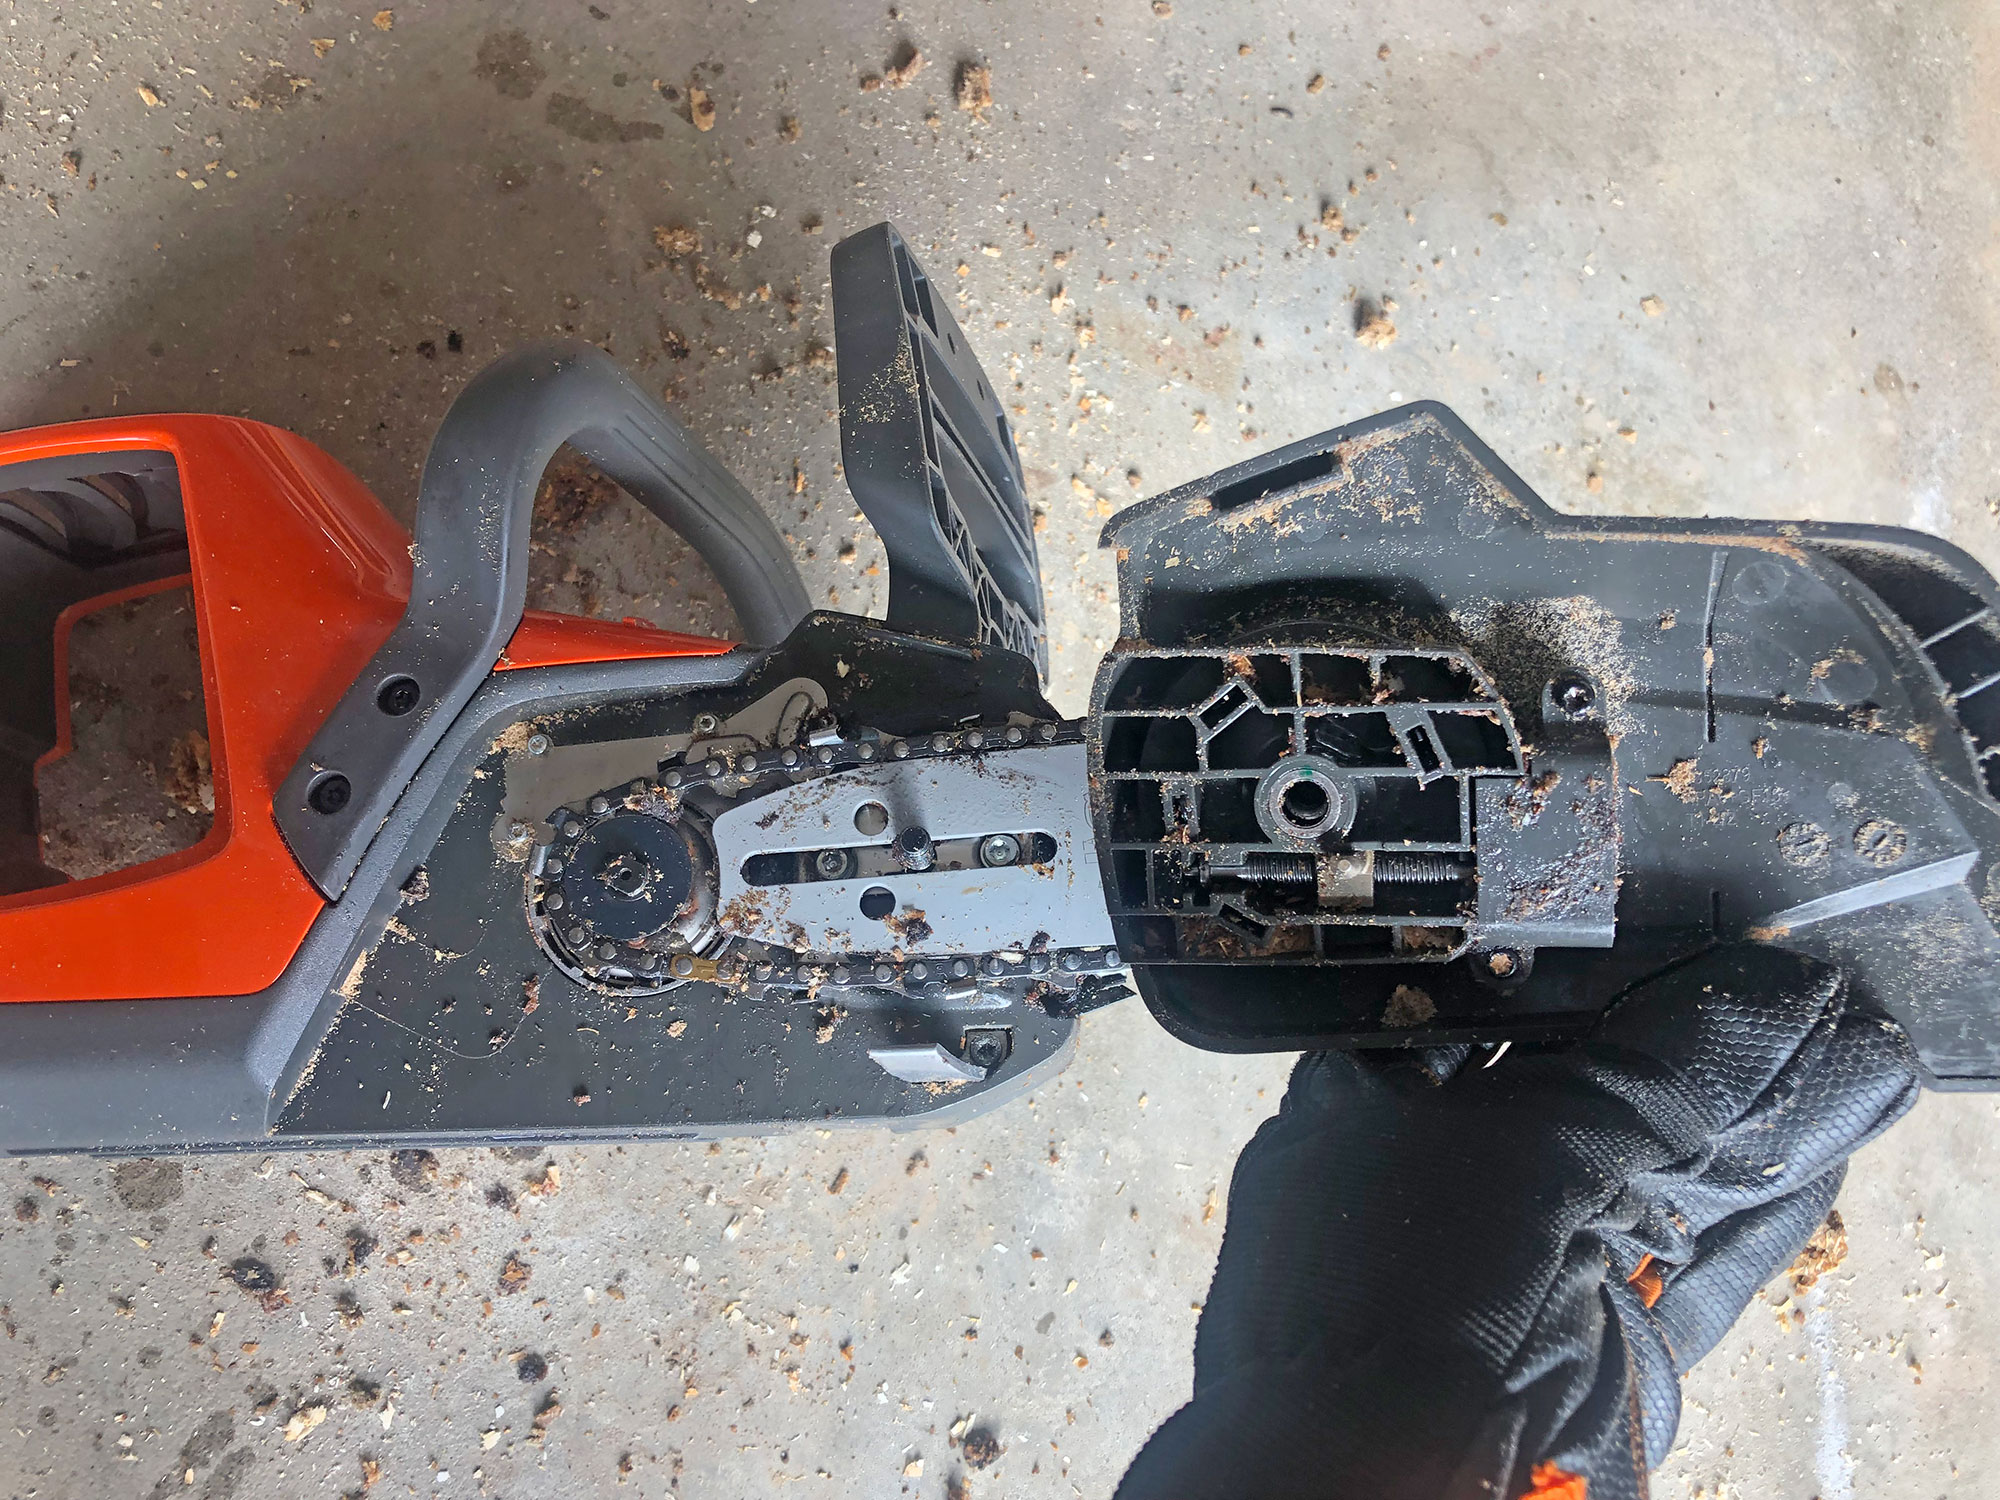 The 5 Best Battery Chainsaws